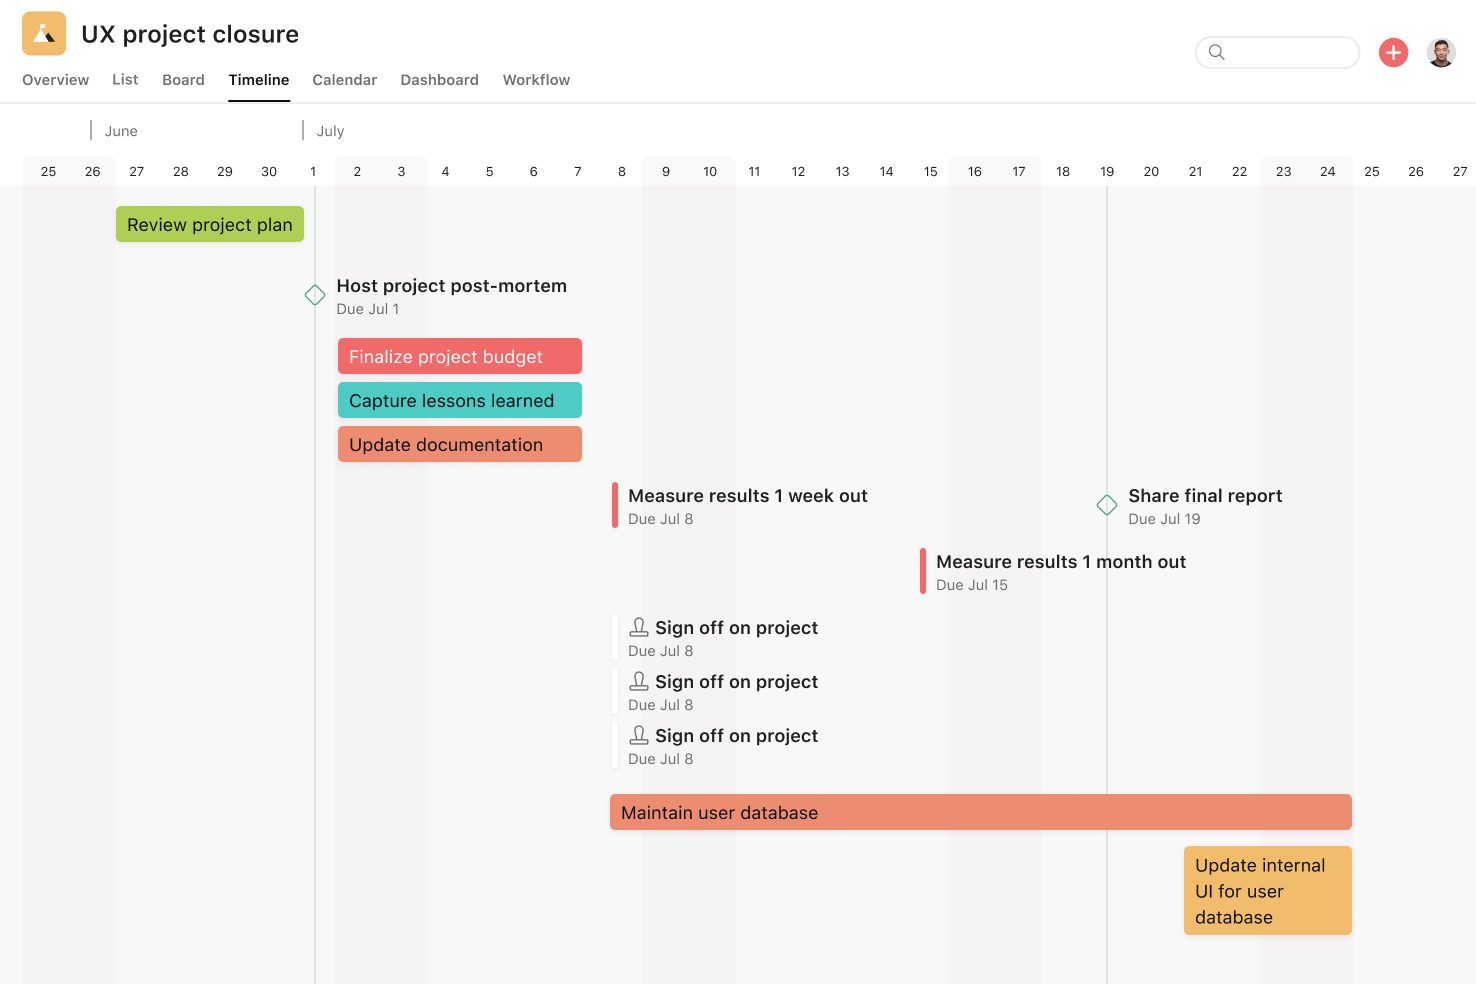 [product ui] Project closure template in Asana, Gantt style project view (Timeline)